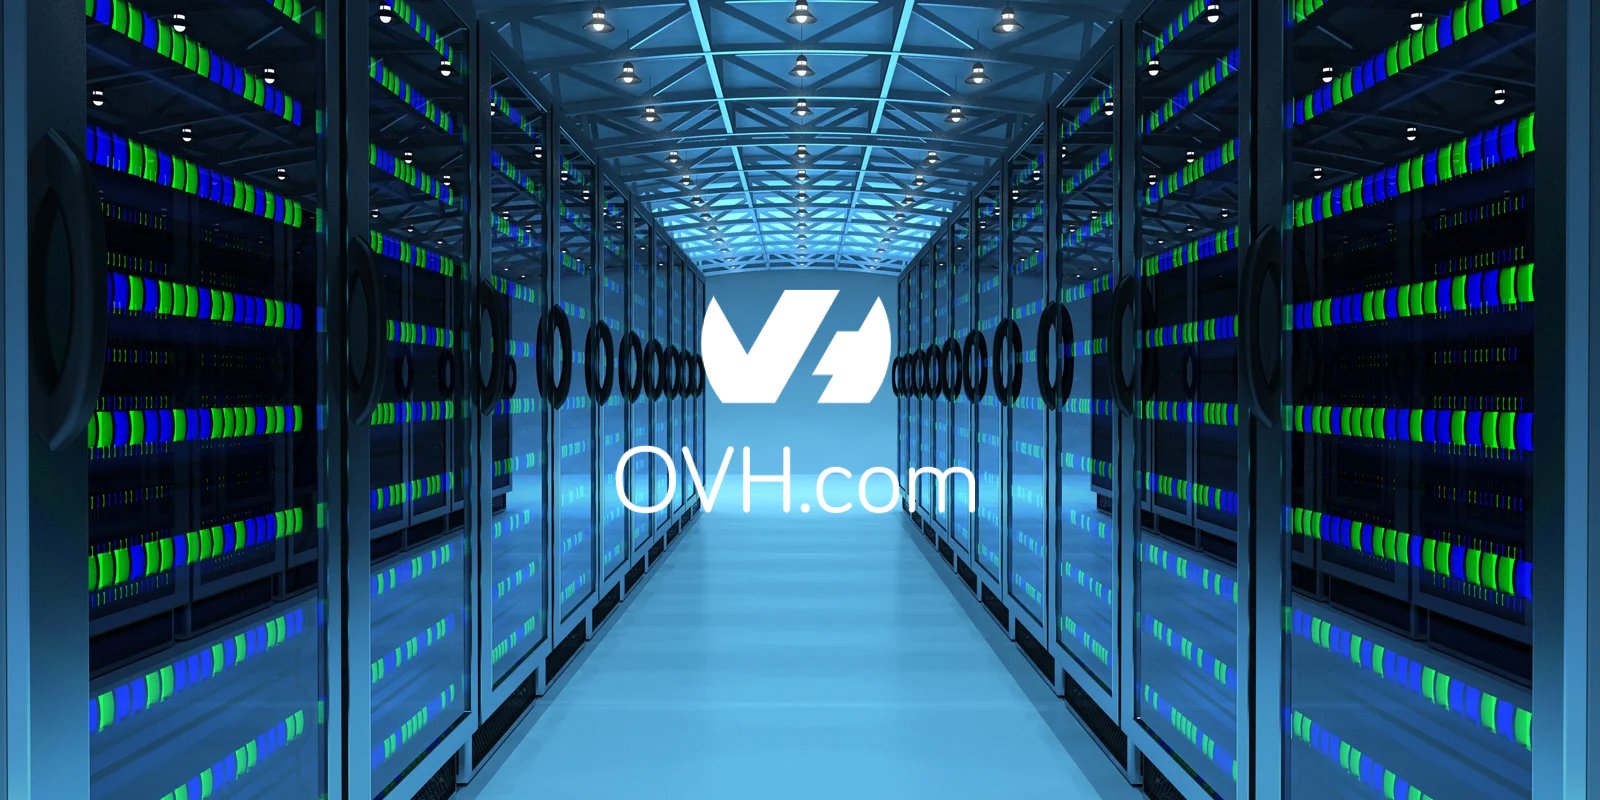 OVH hosting provider goes down during planned maintenance